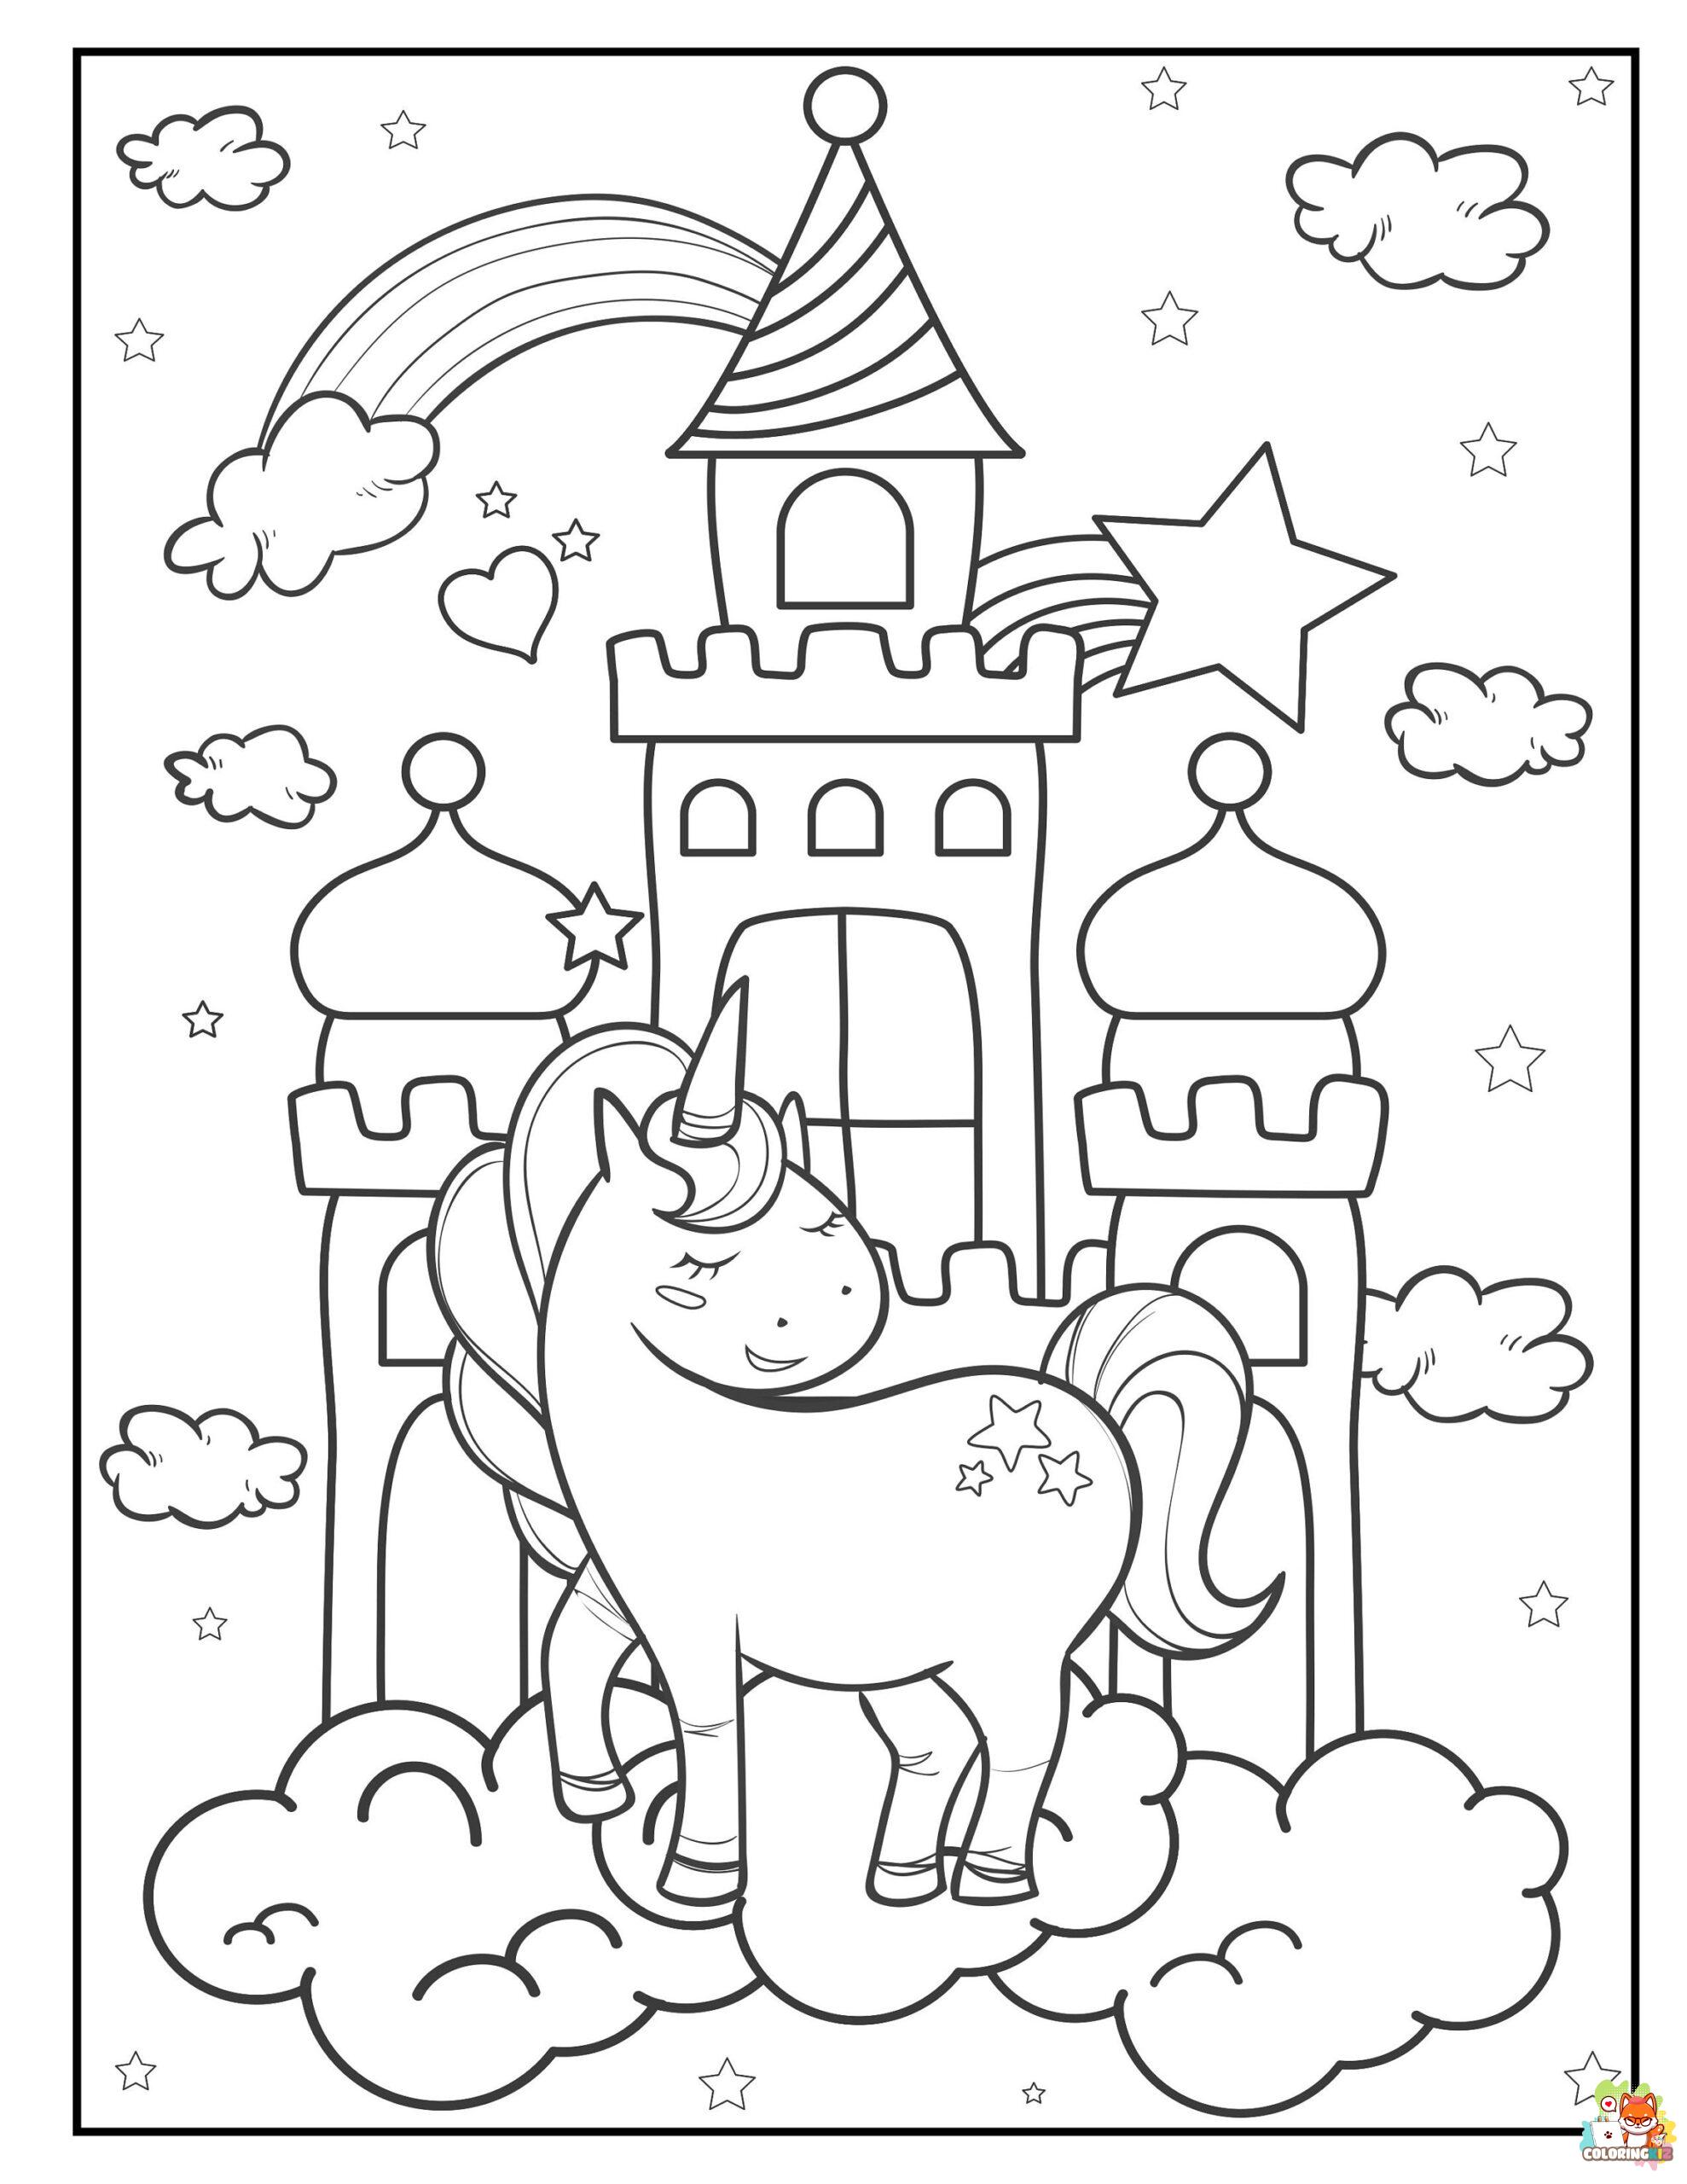 Unicorn and the Castle